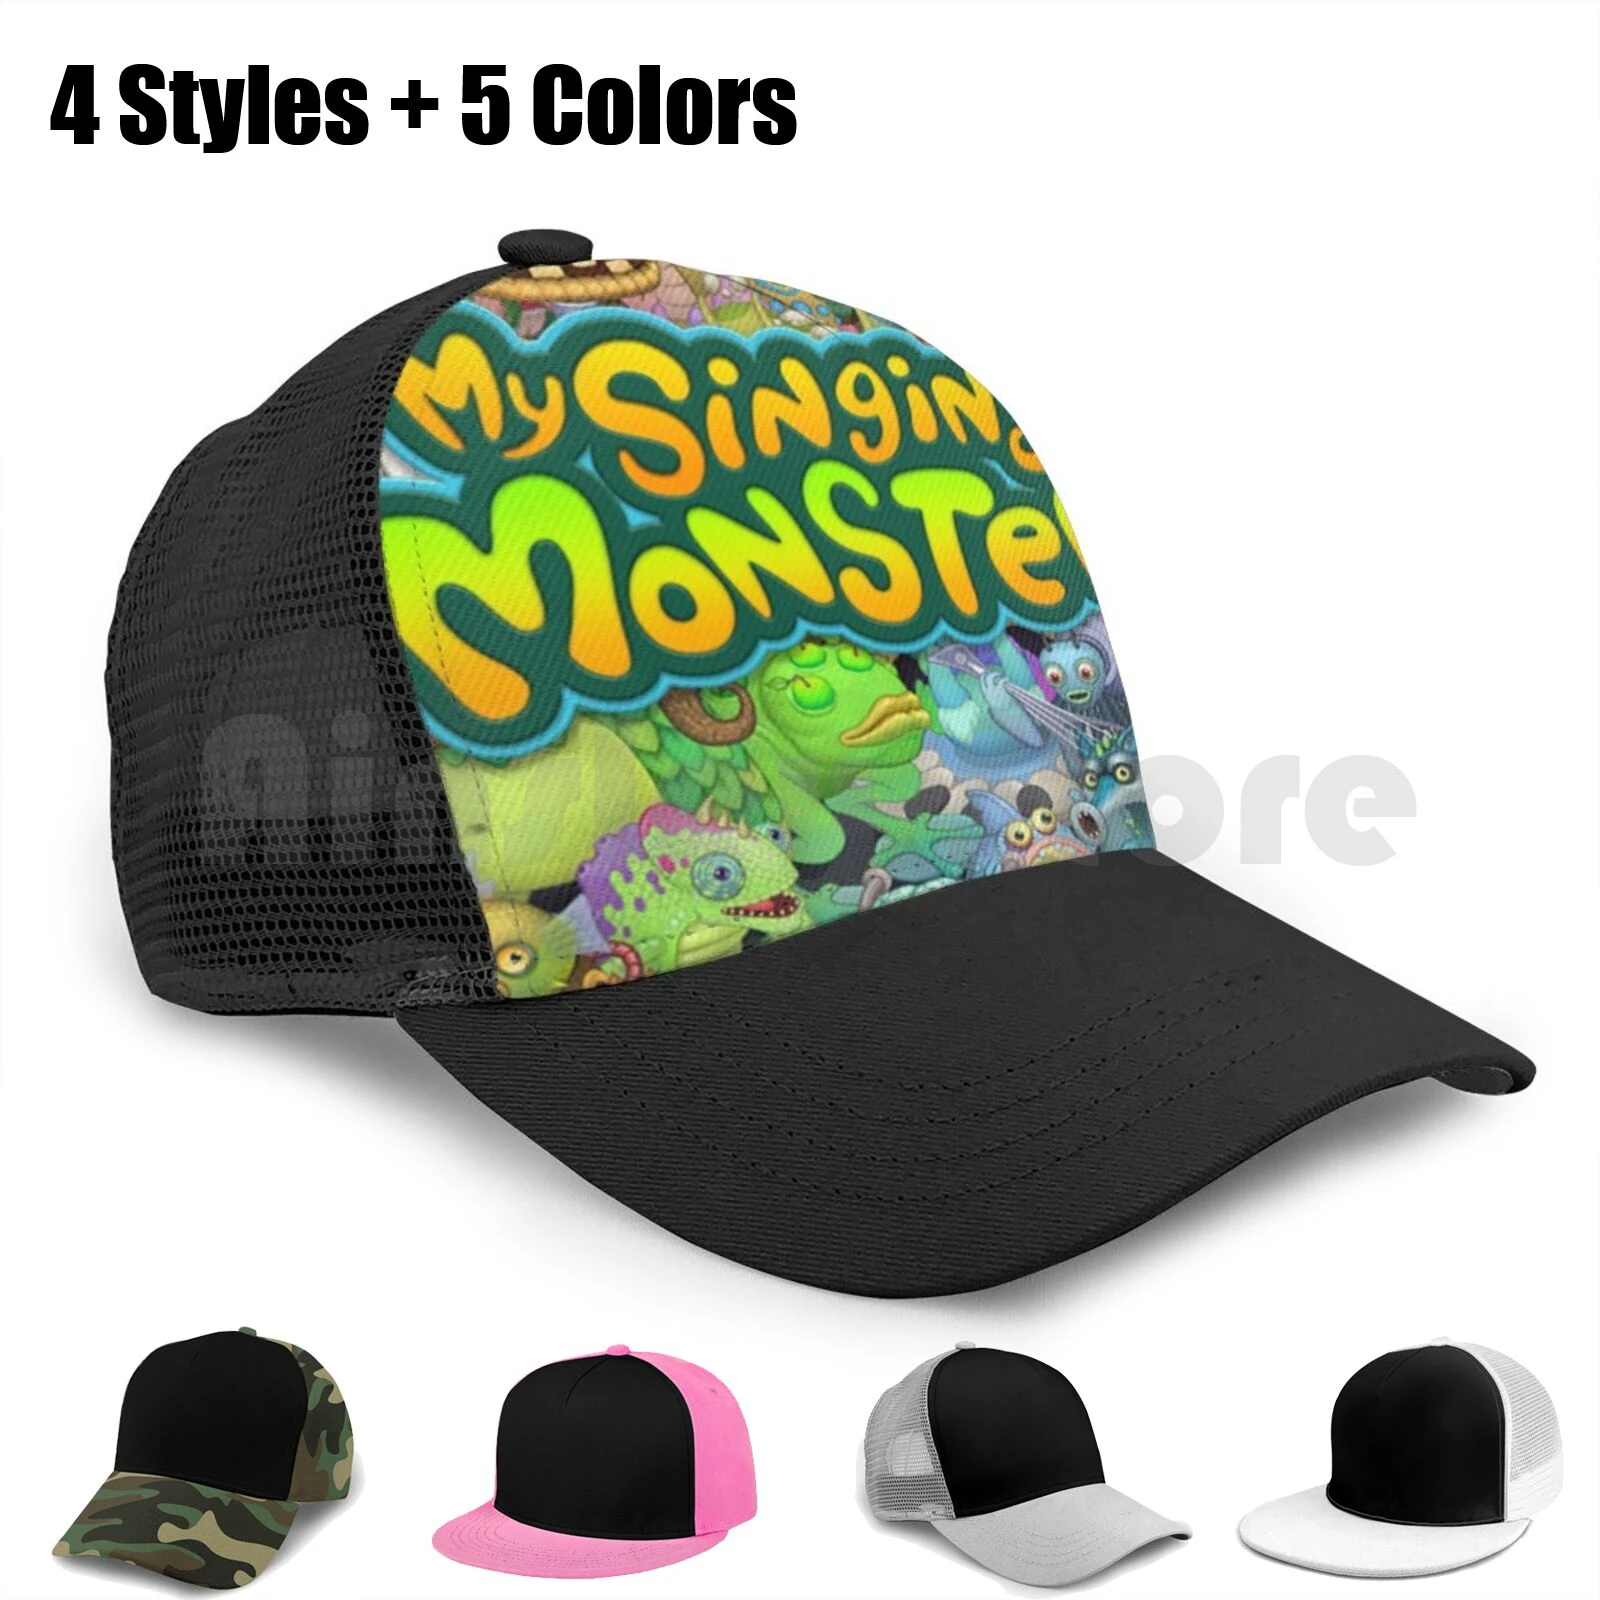 My Singing Monsters Characters And Title Baseball Cap Adjustable Snapback  Hats Hip Hop My Singing Monsters My Singing Monster|Men's Baseball Caps| -  AliExpress